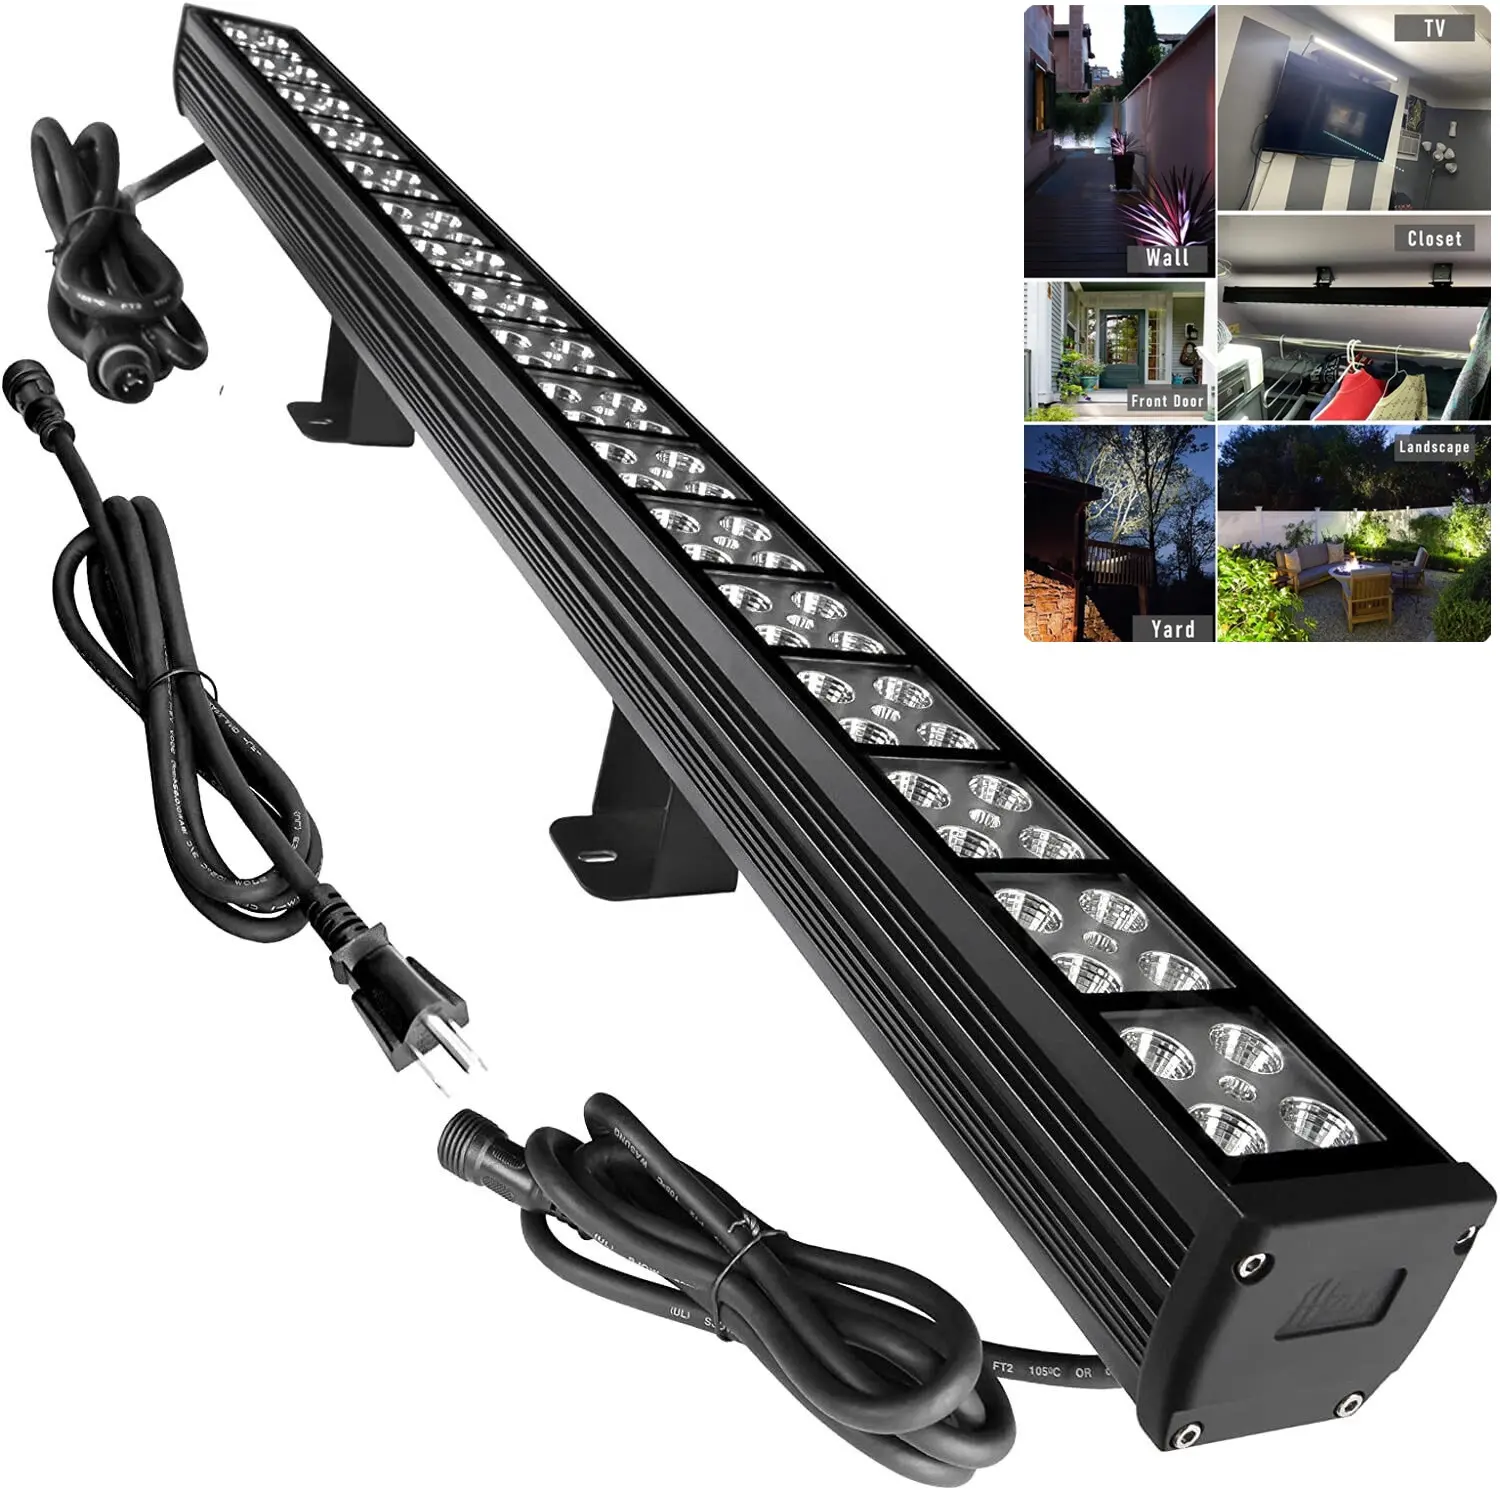 High Power DMX 72W LED Wall Washer Light Linear LED Bar IP65 impermeabile indoor Outdoor Landscape Lighting con progetto di facciata